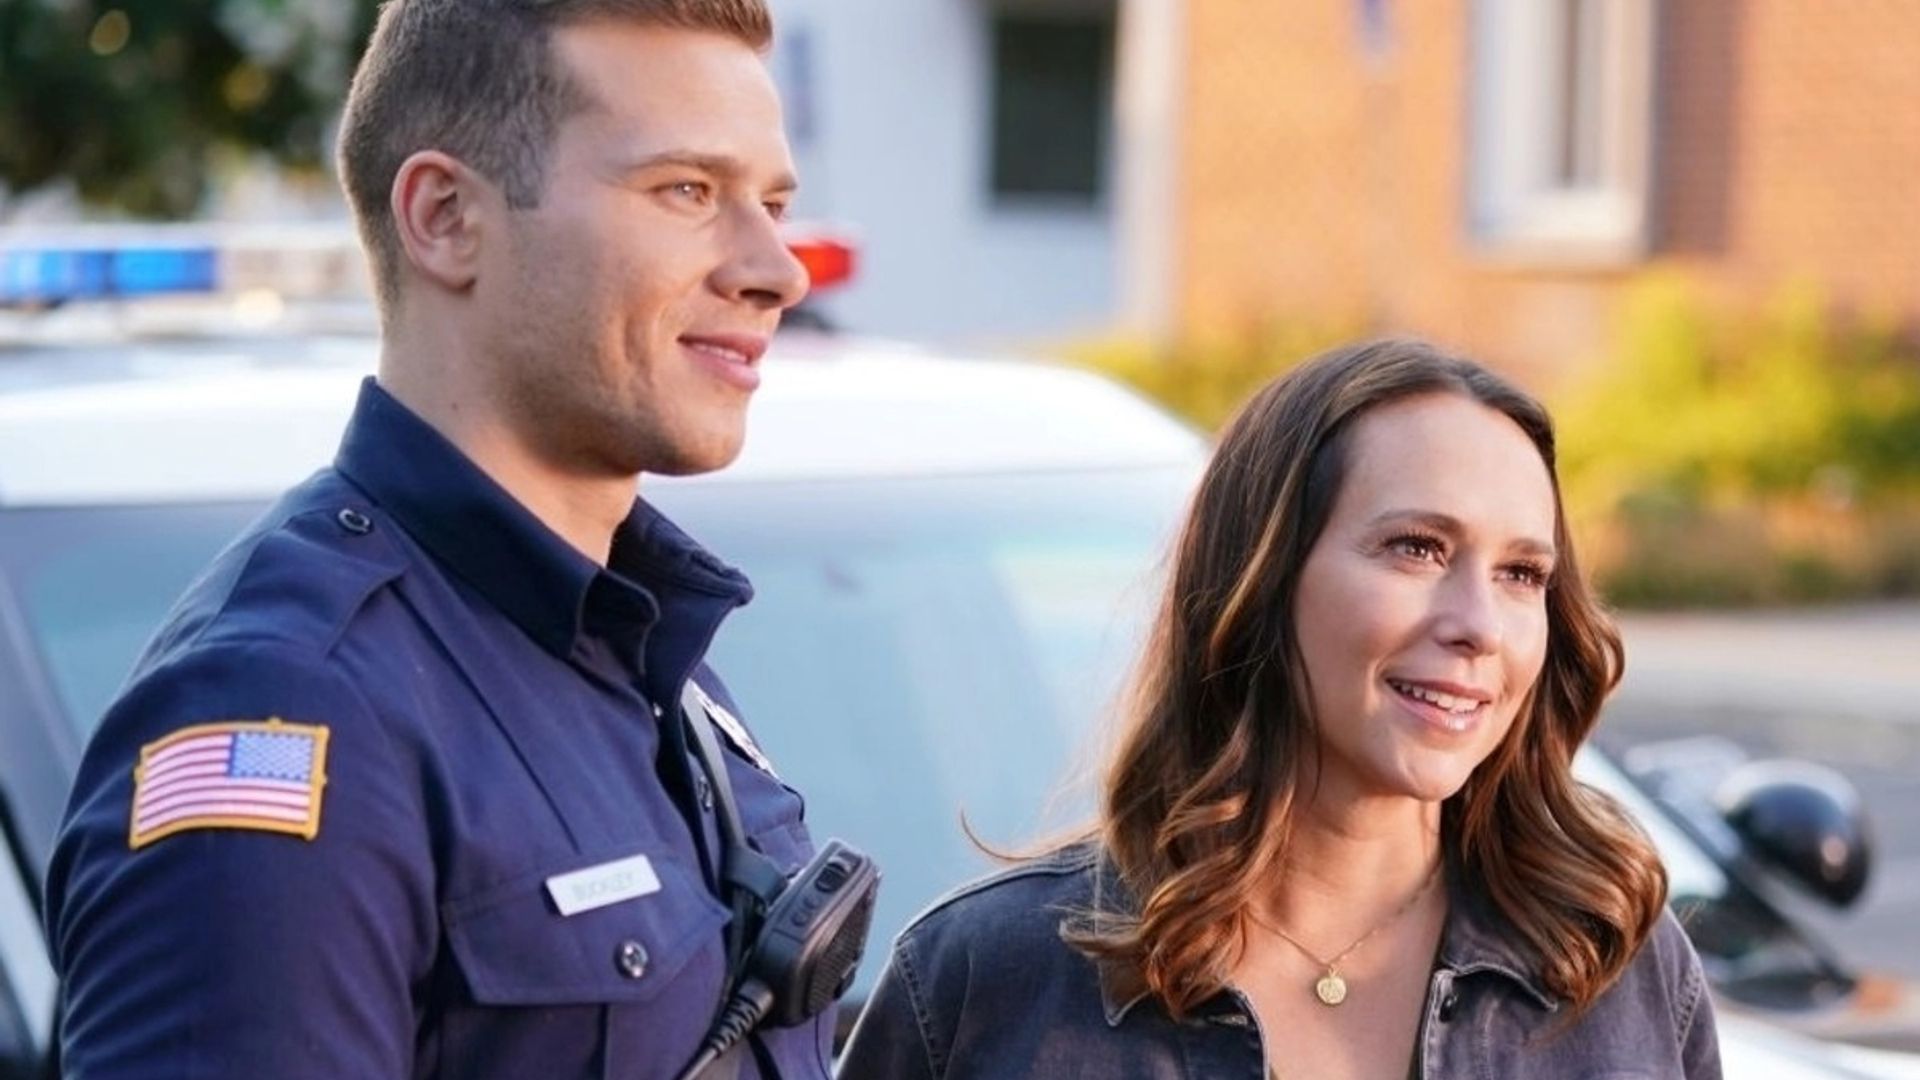 9-1-1's Oliver Stark shares behind-the-scenes picture as Jennifer Love Hewittt confirms return